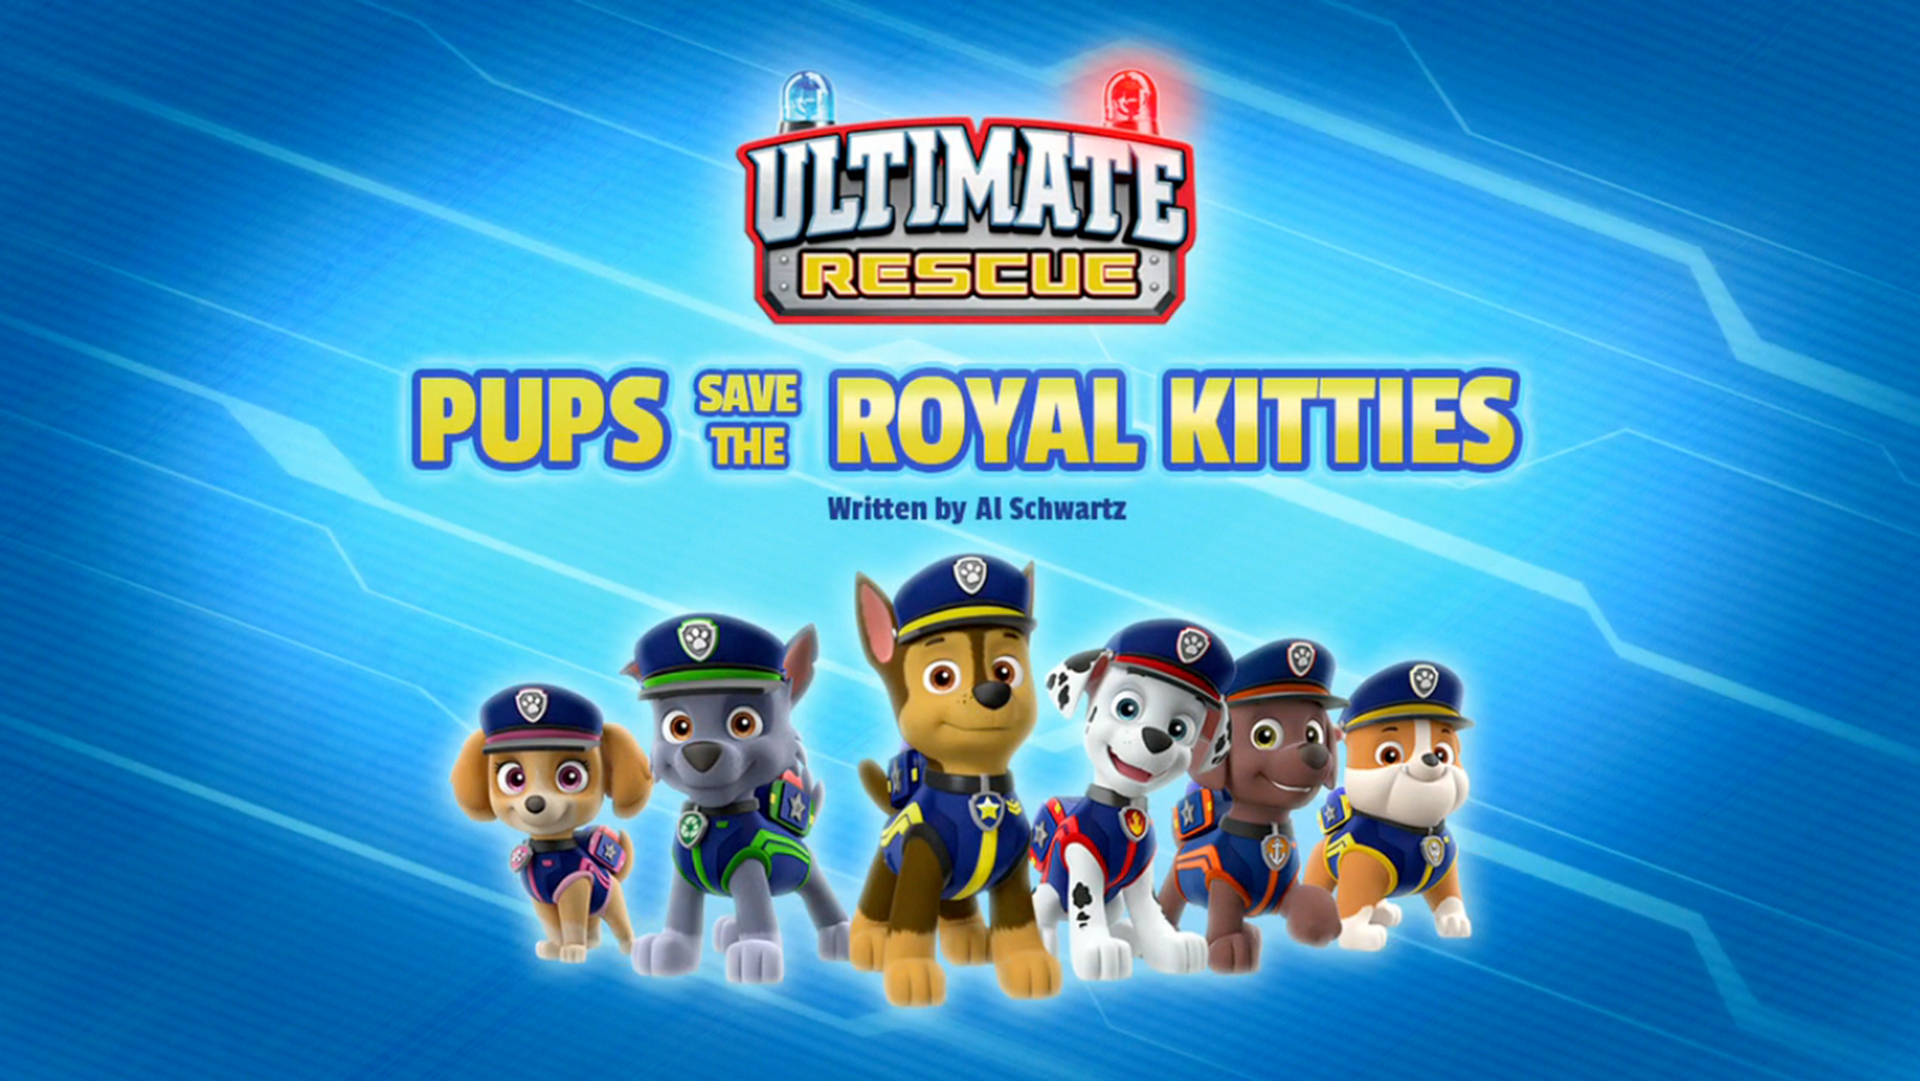 paw patrol ultimate rescue ryder